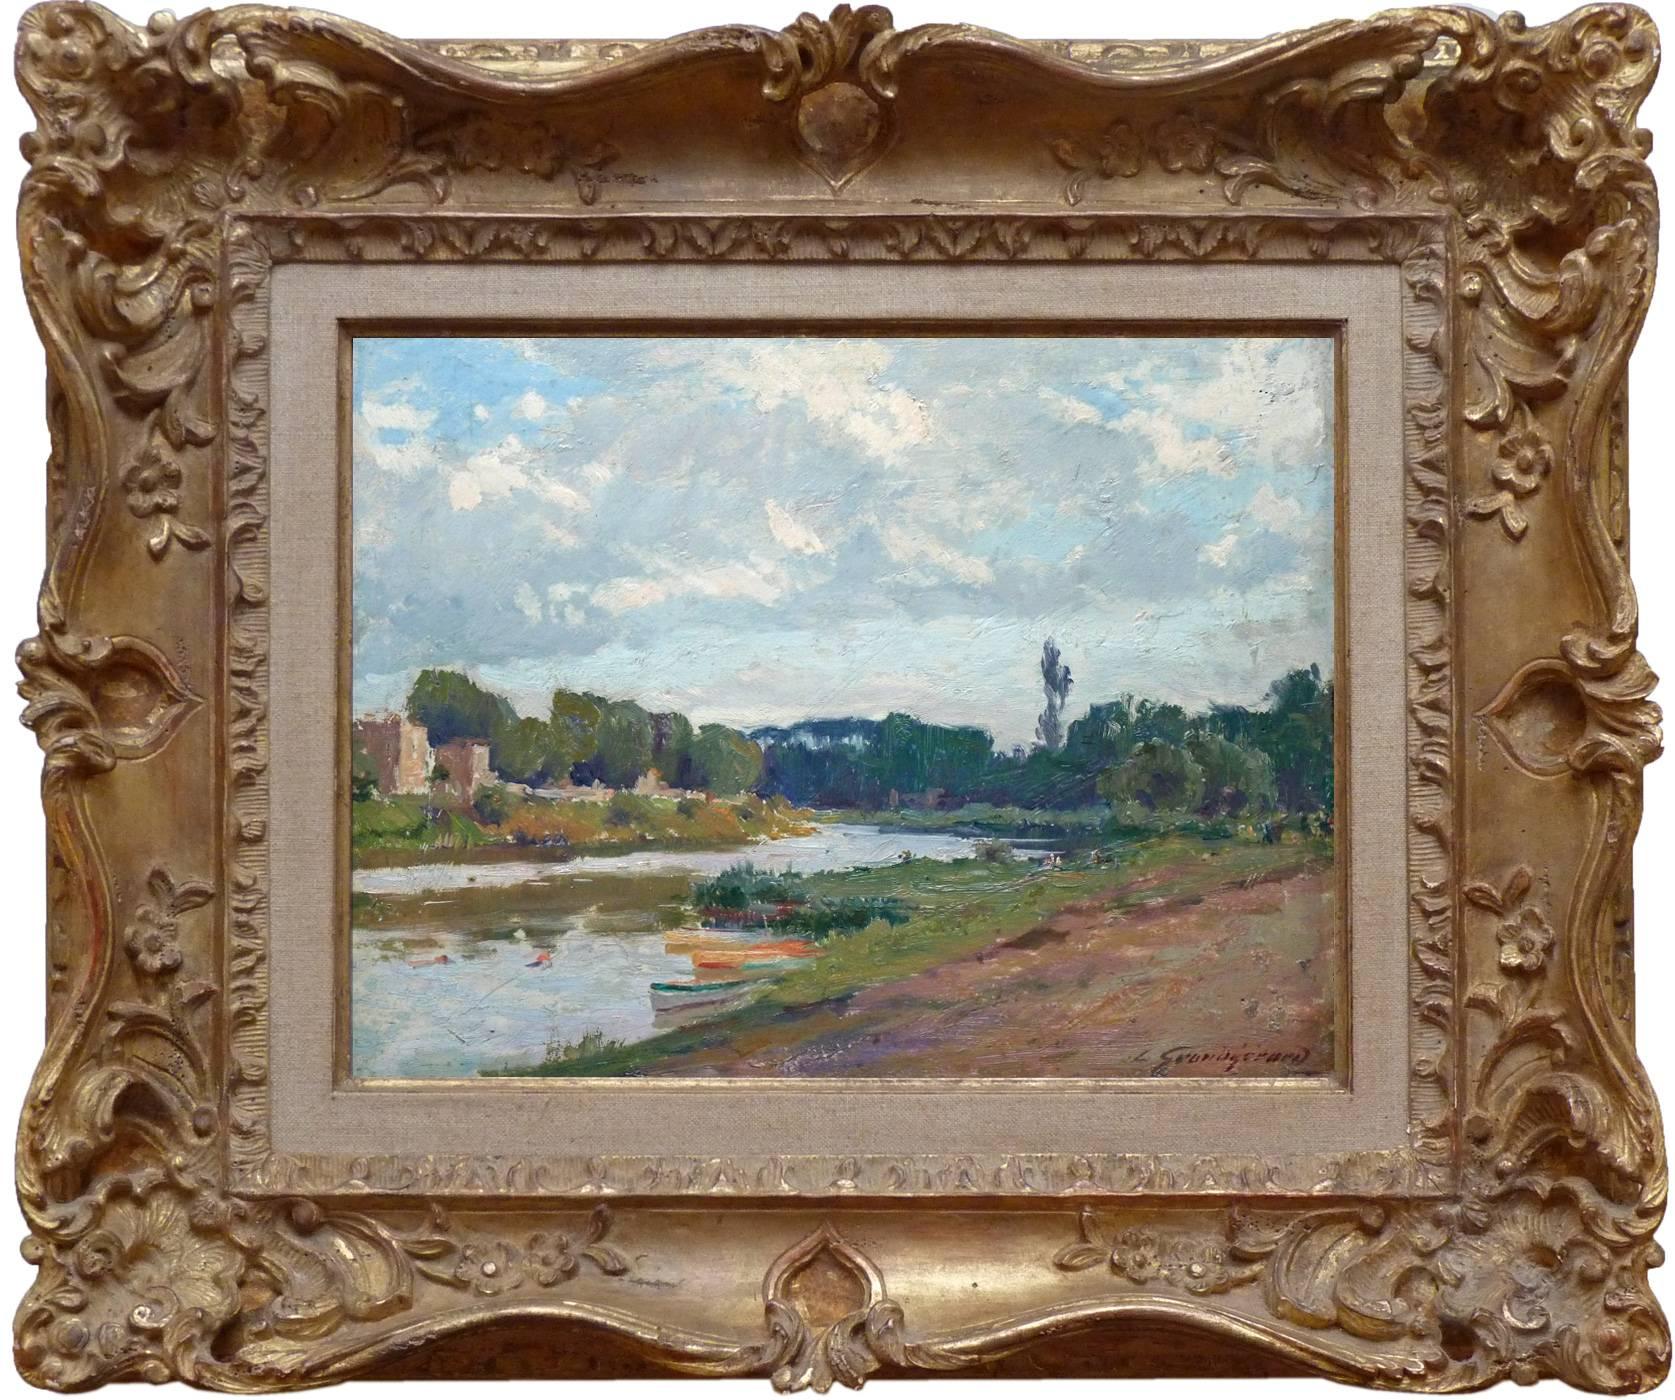 Lucien Henri Grandgérard Landscape Painting - The Marne river near Perreux, Oil painting by french artist Grandg�érard